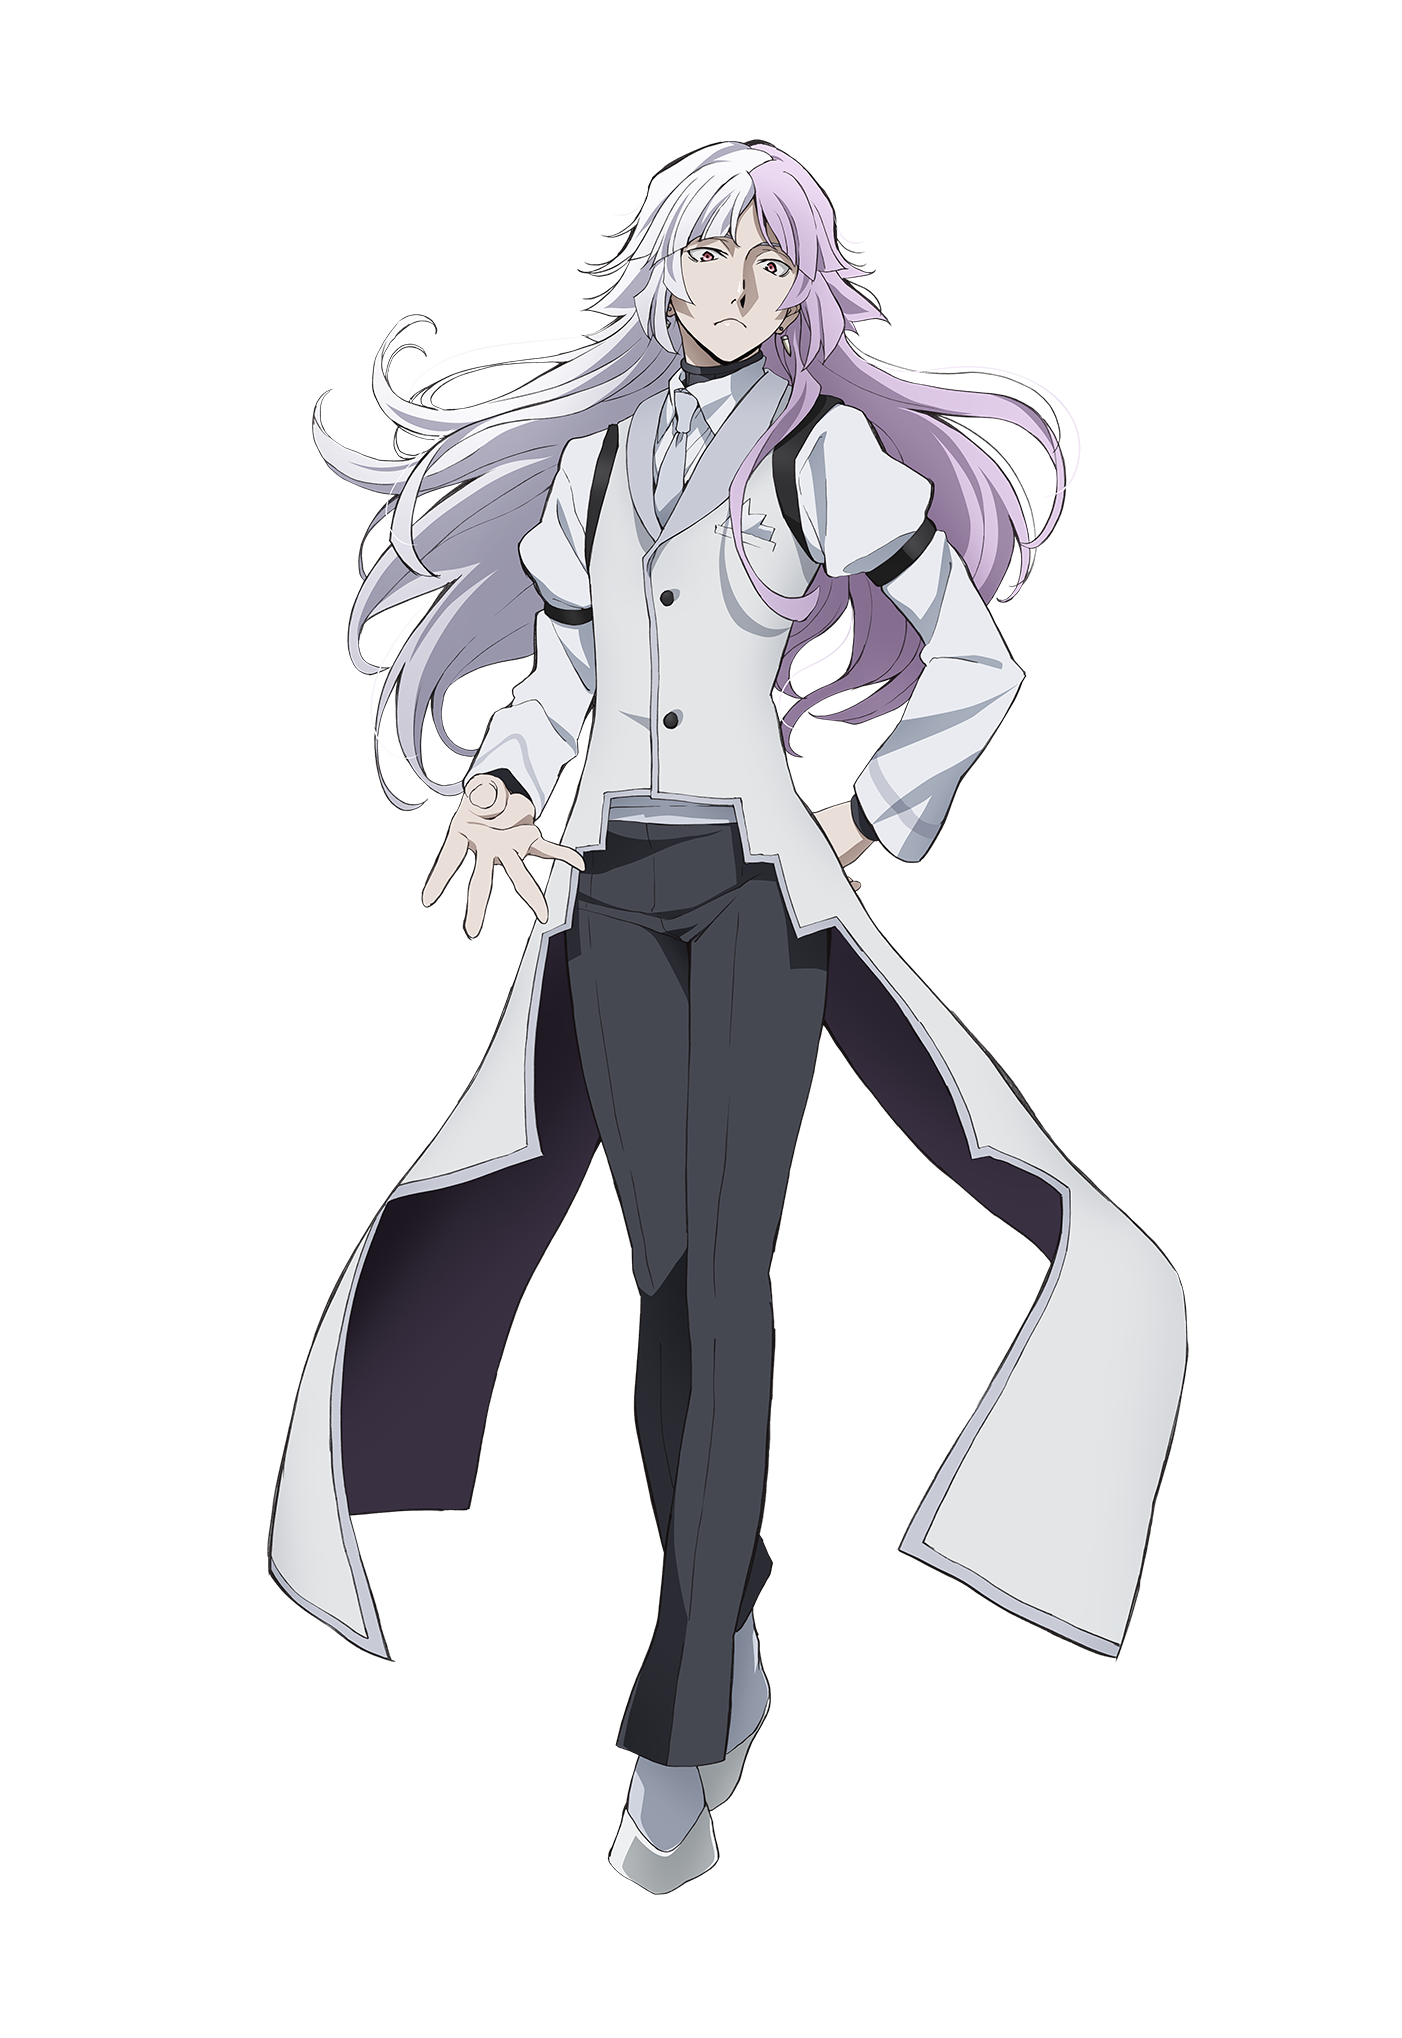 Bungo Stray Dogs Sigma character design